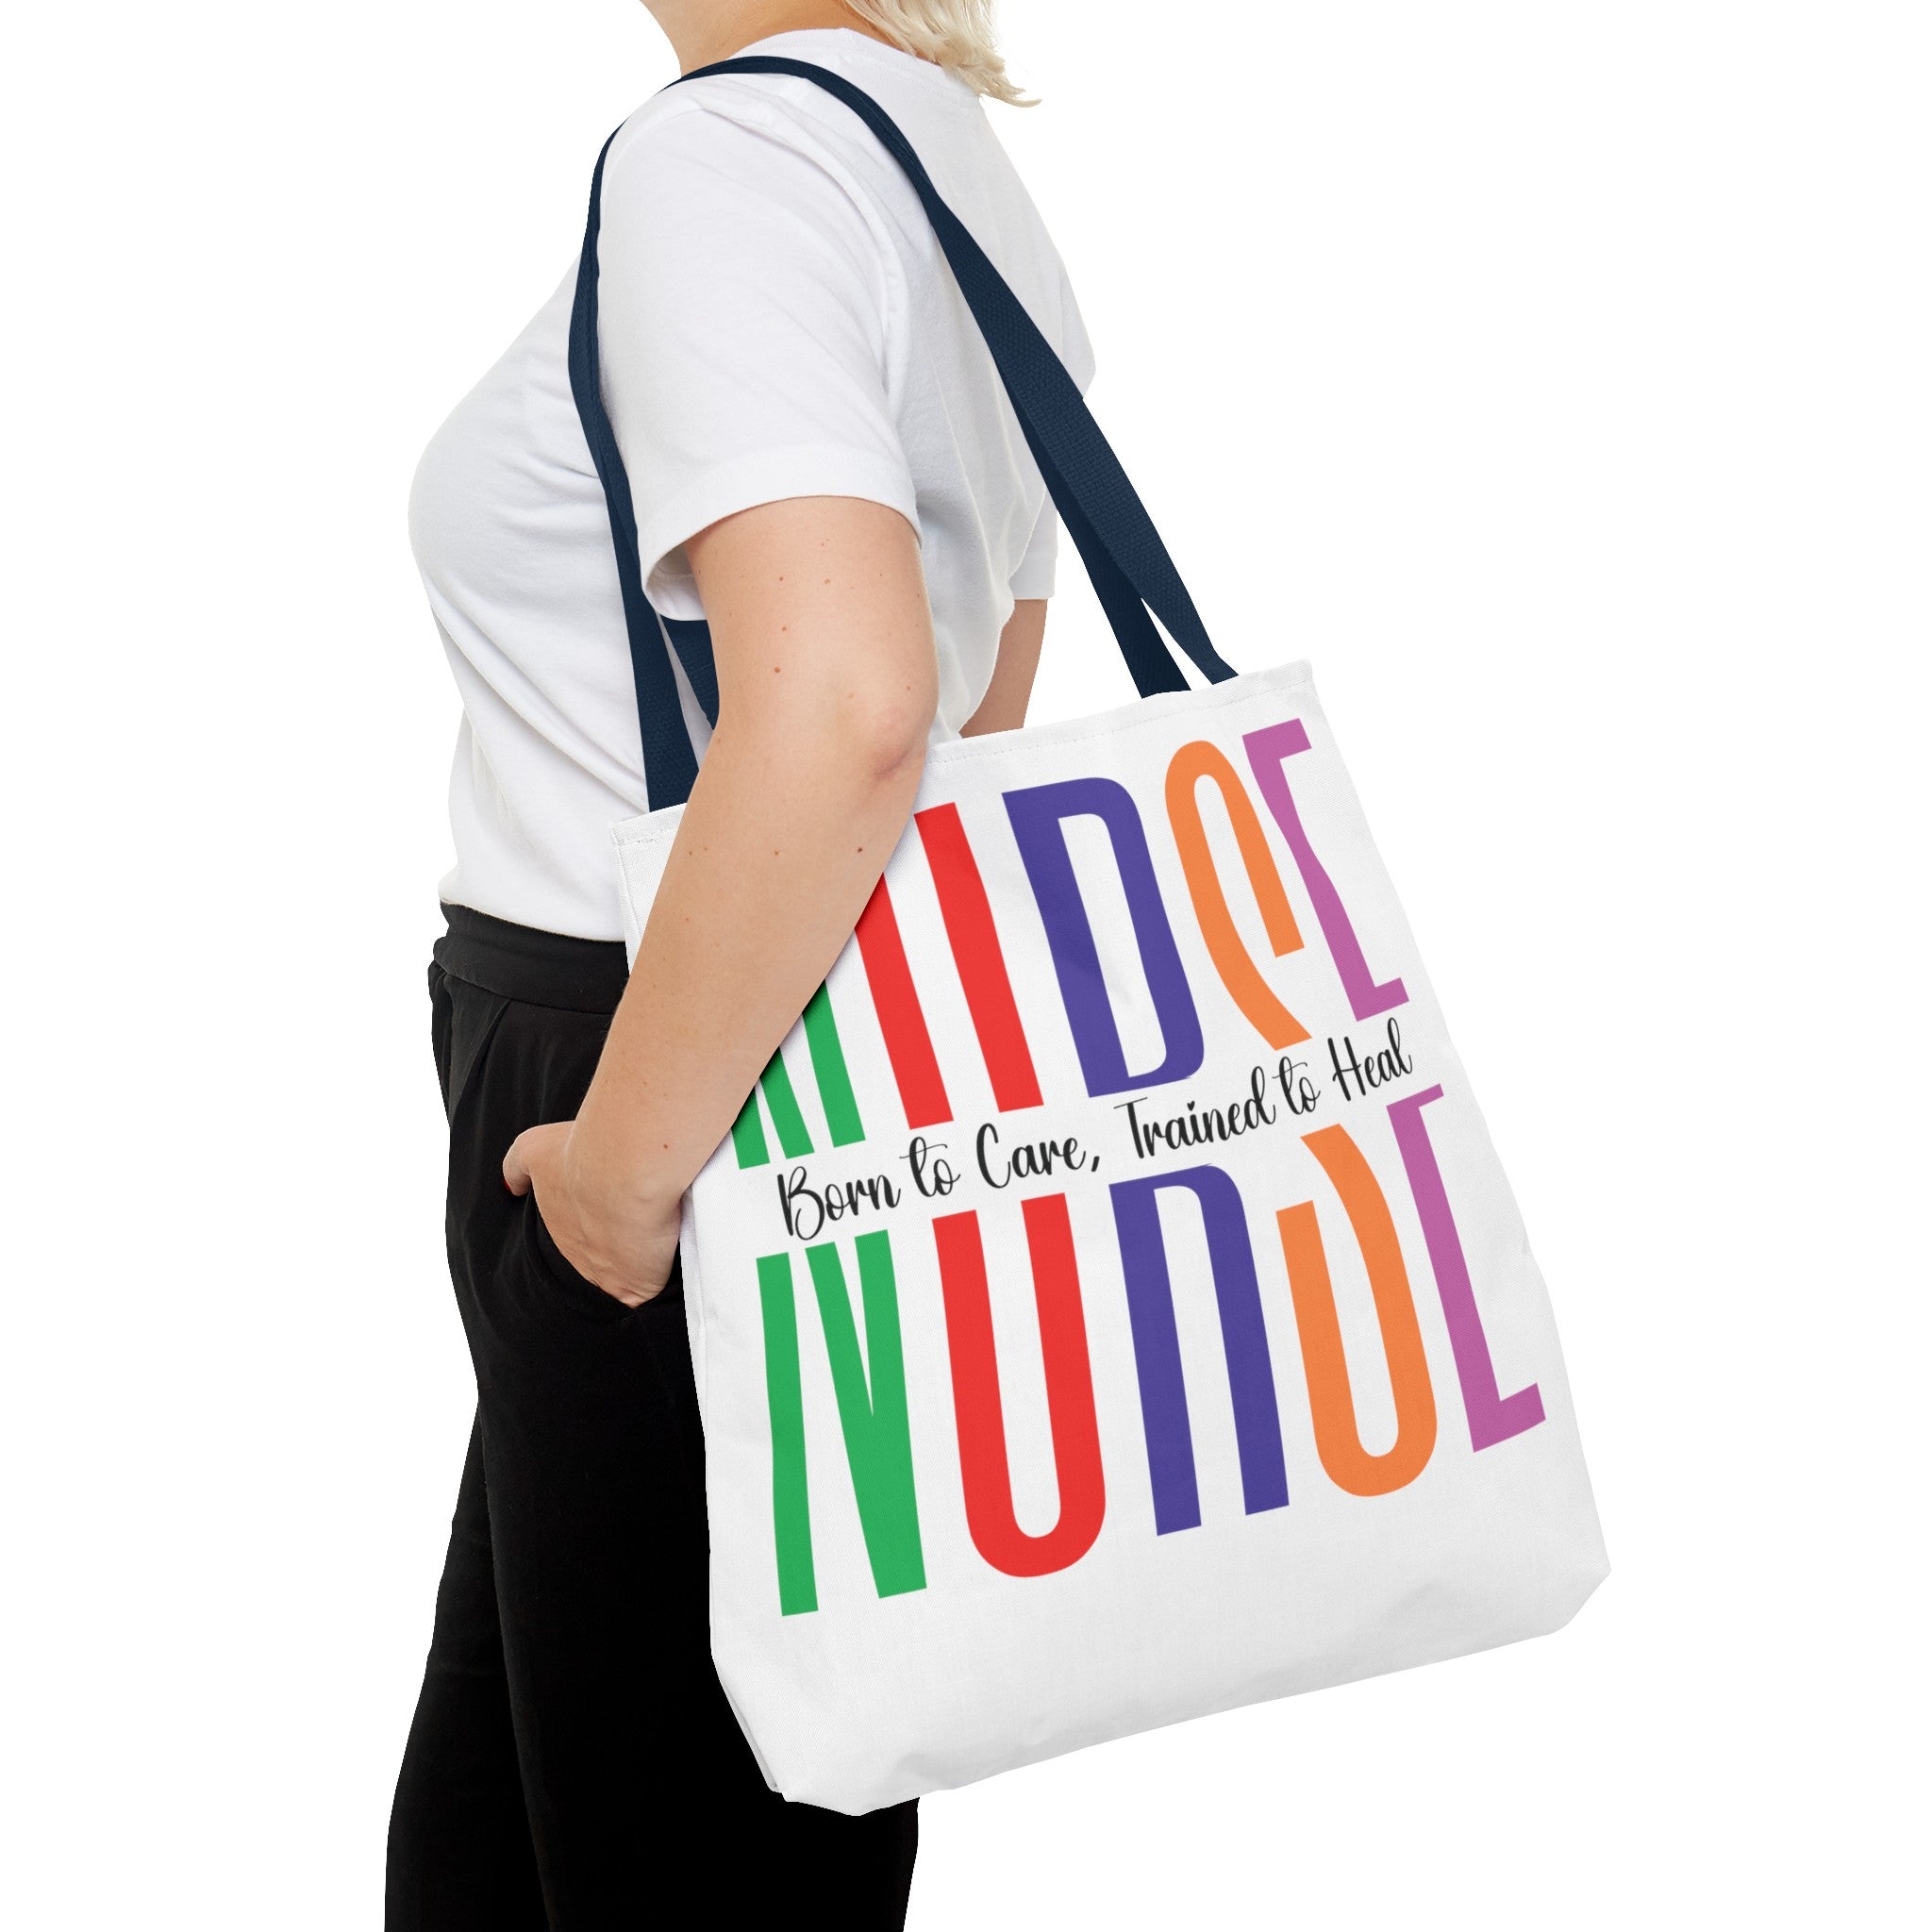 Nurse Tote Bag (AOP) Born To Care, Trained to Heal, Gift for Nurse